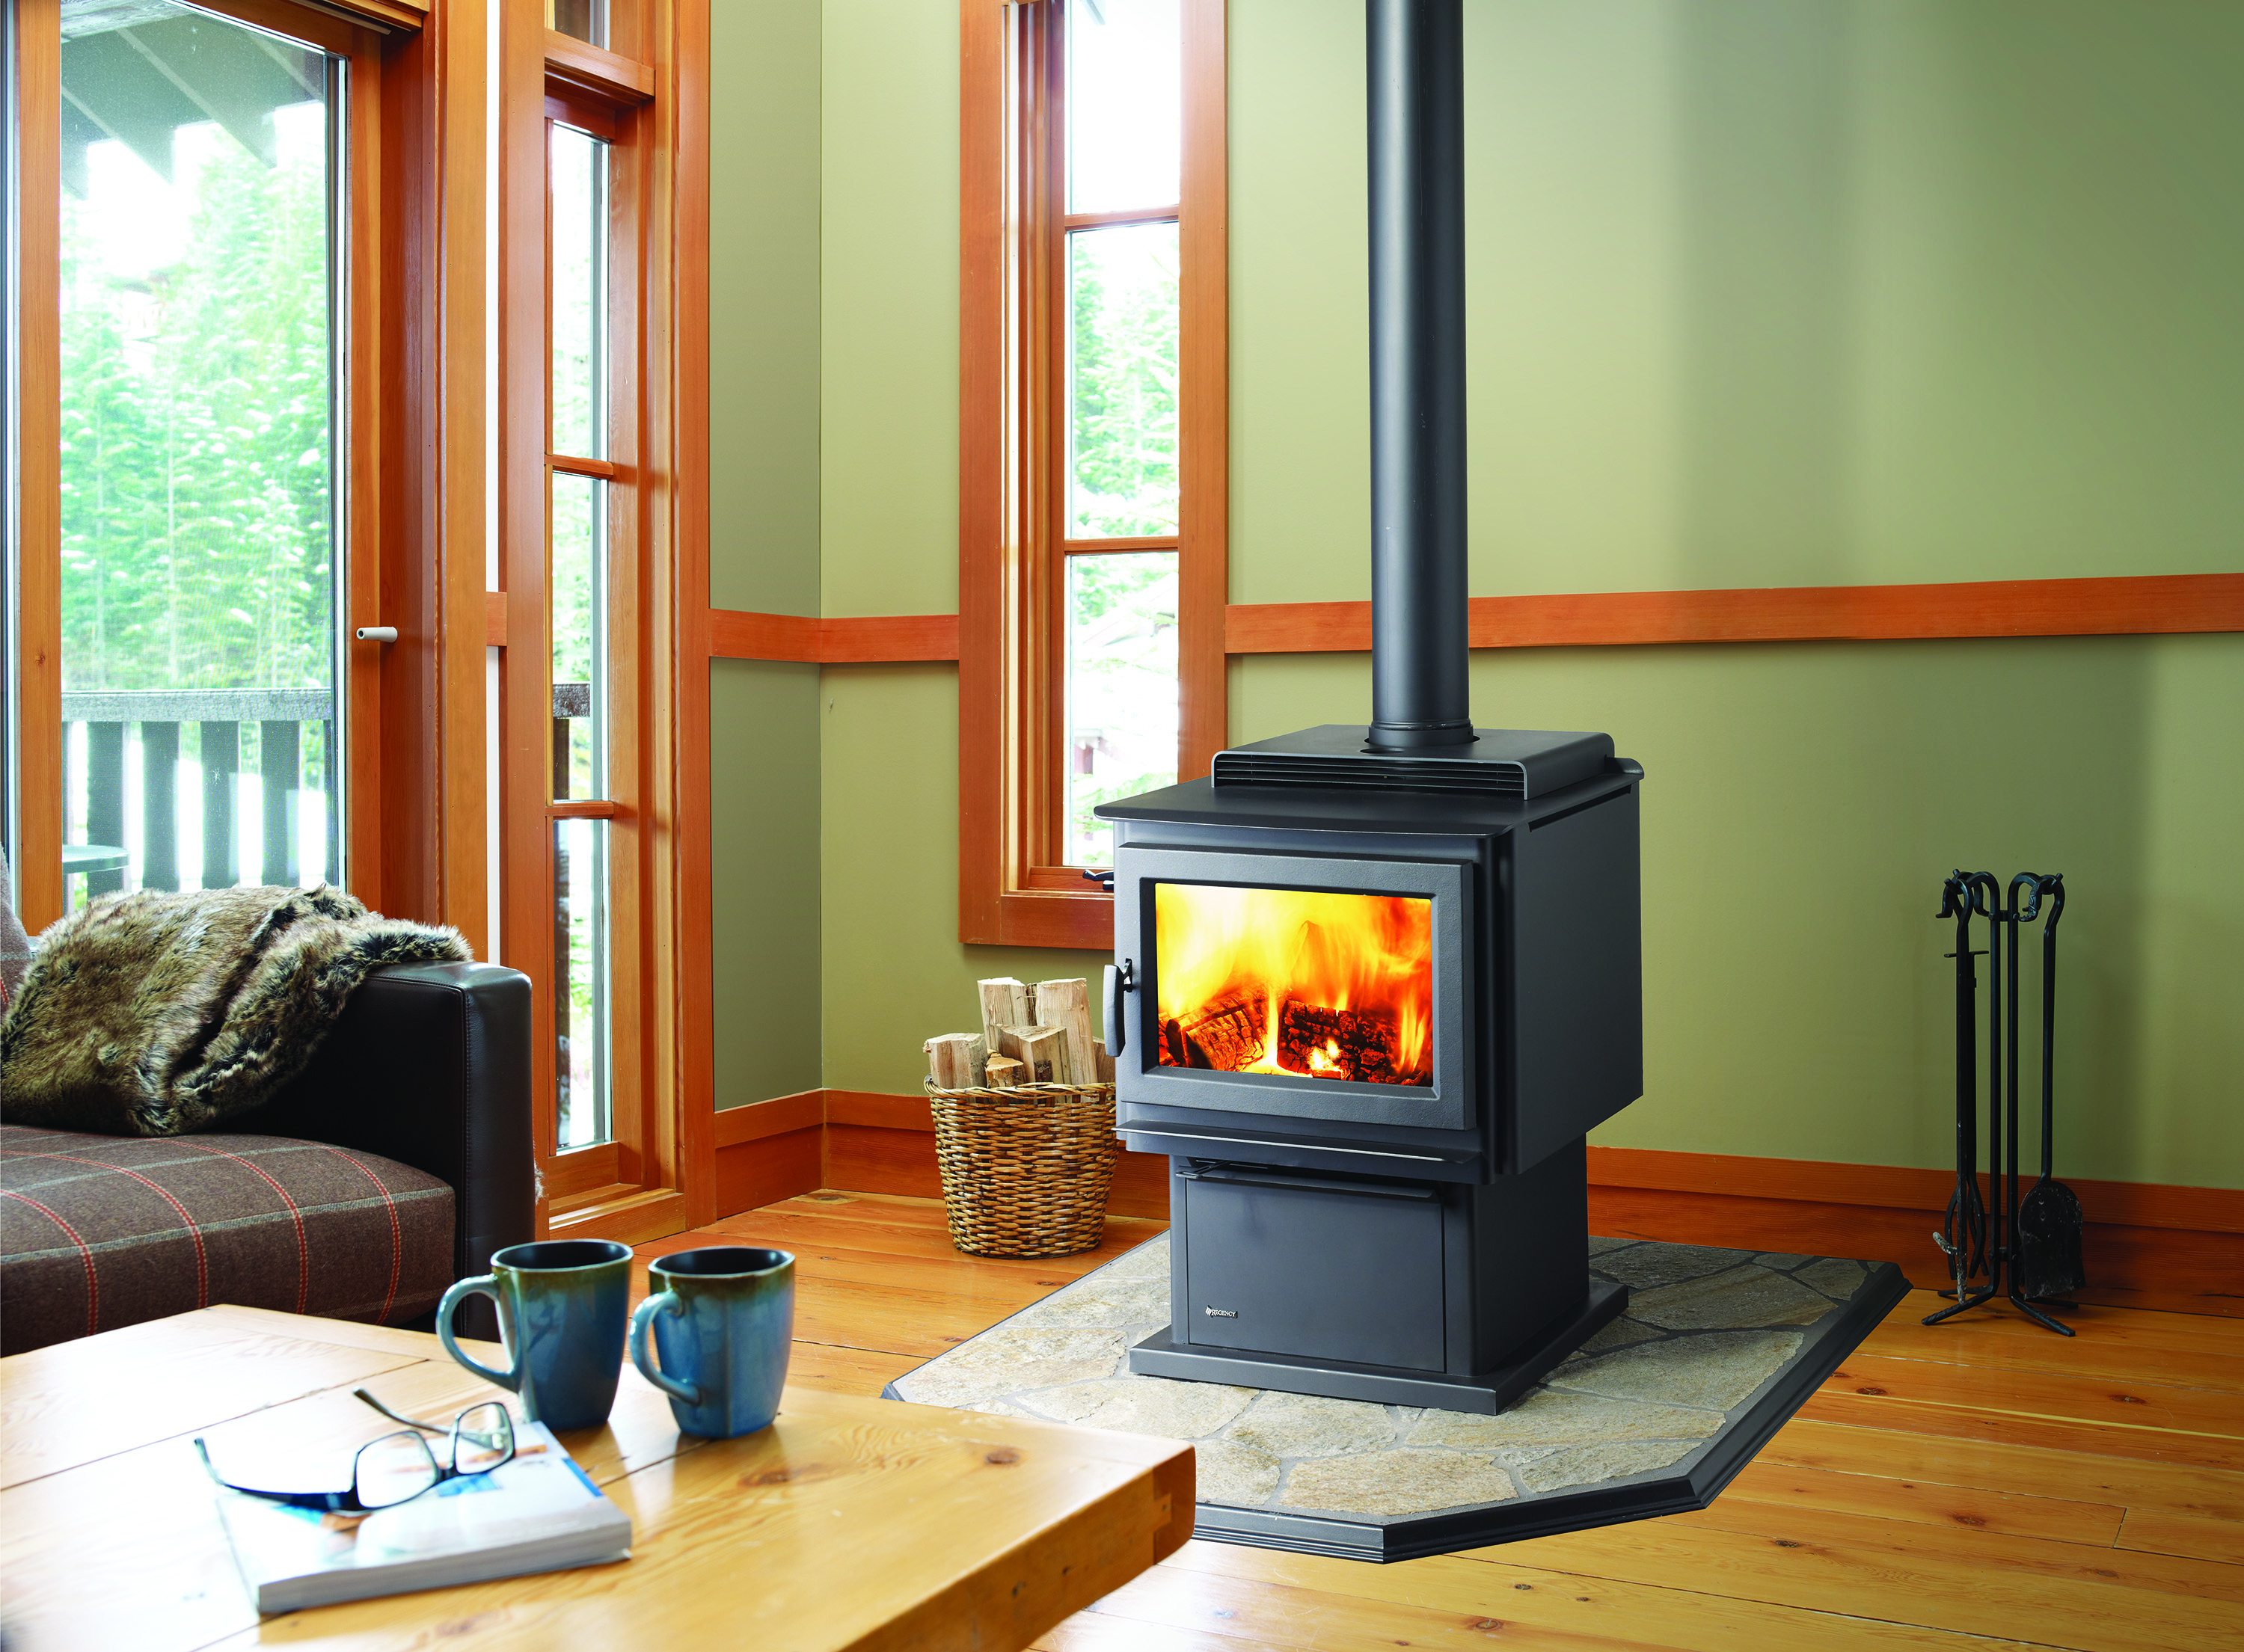 Installing A Wood Burning Stove In An Existing Fireplace